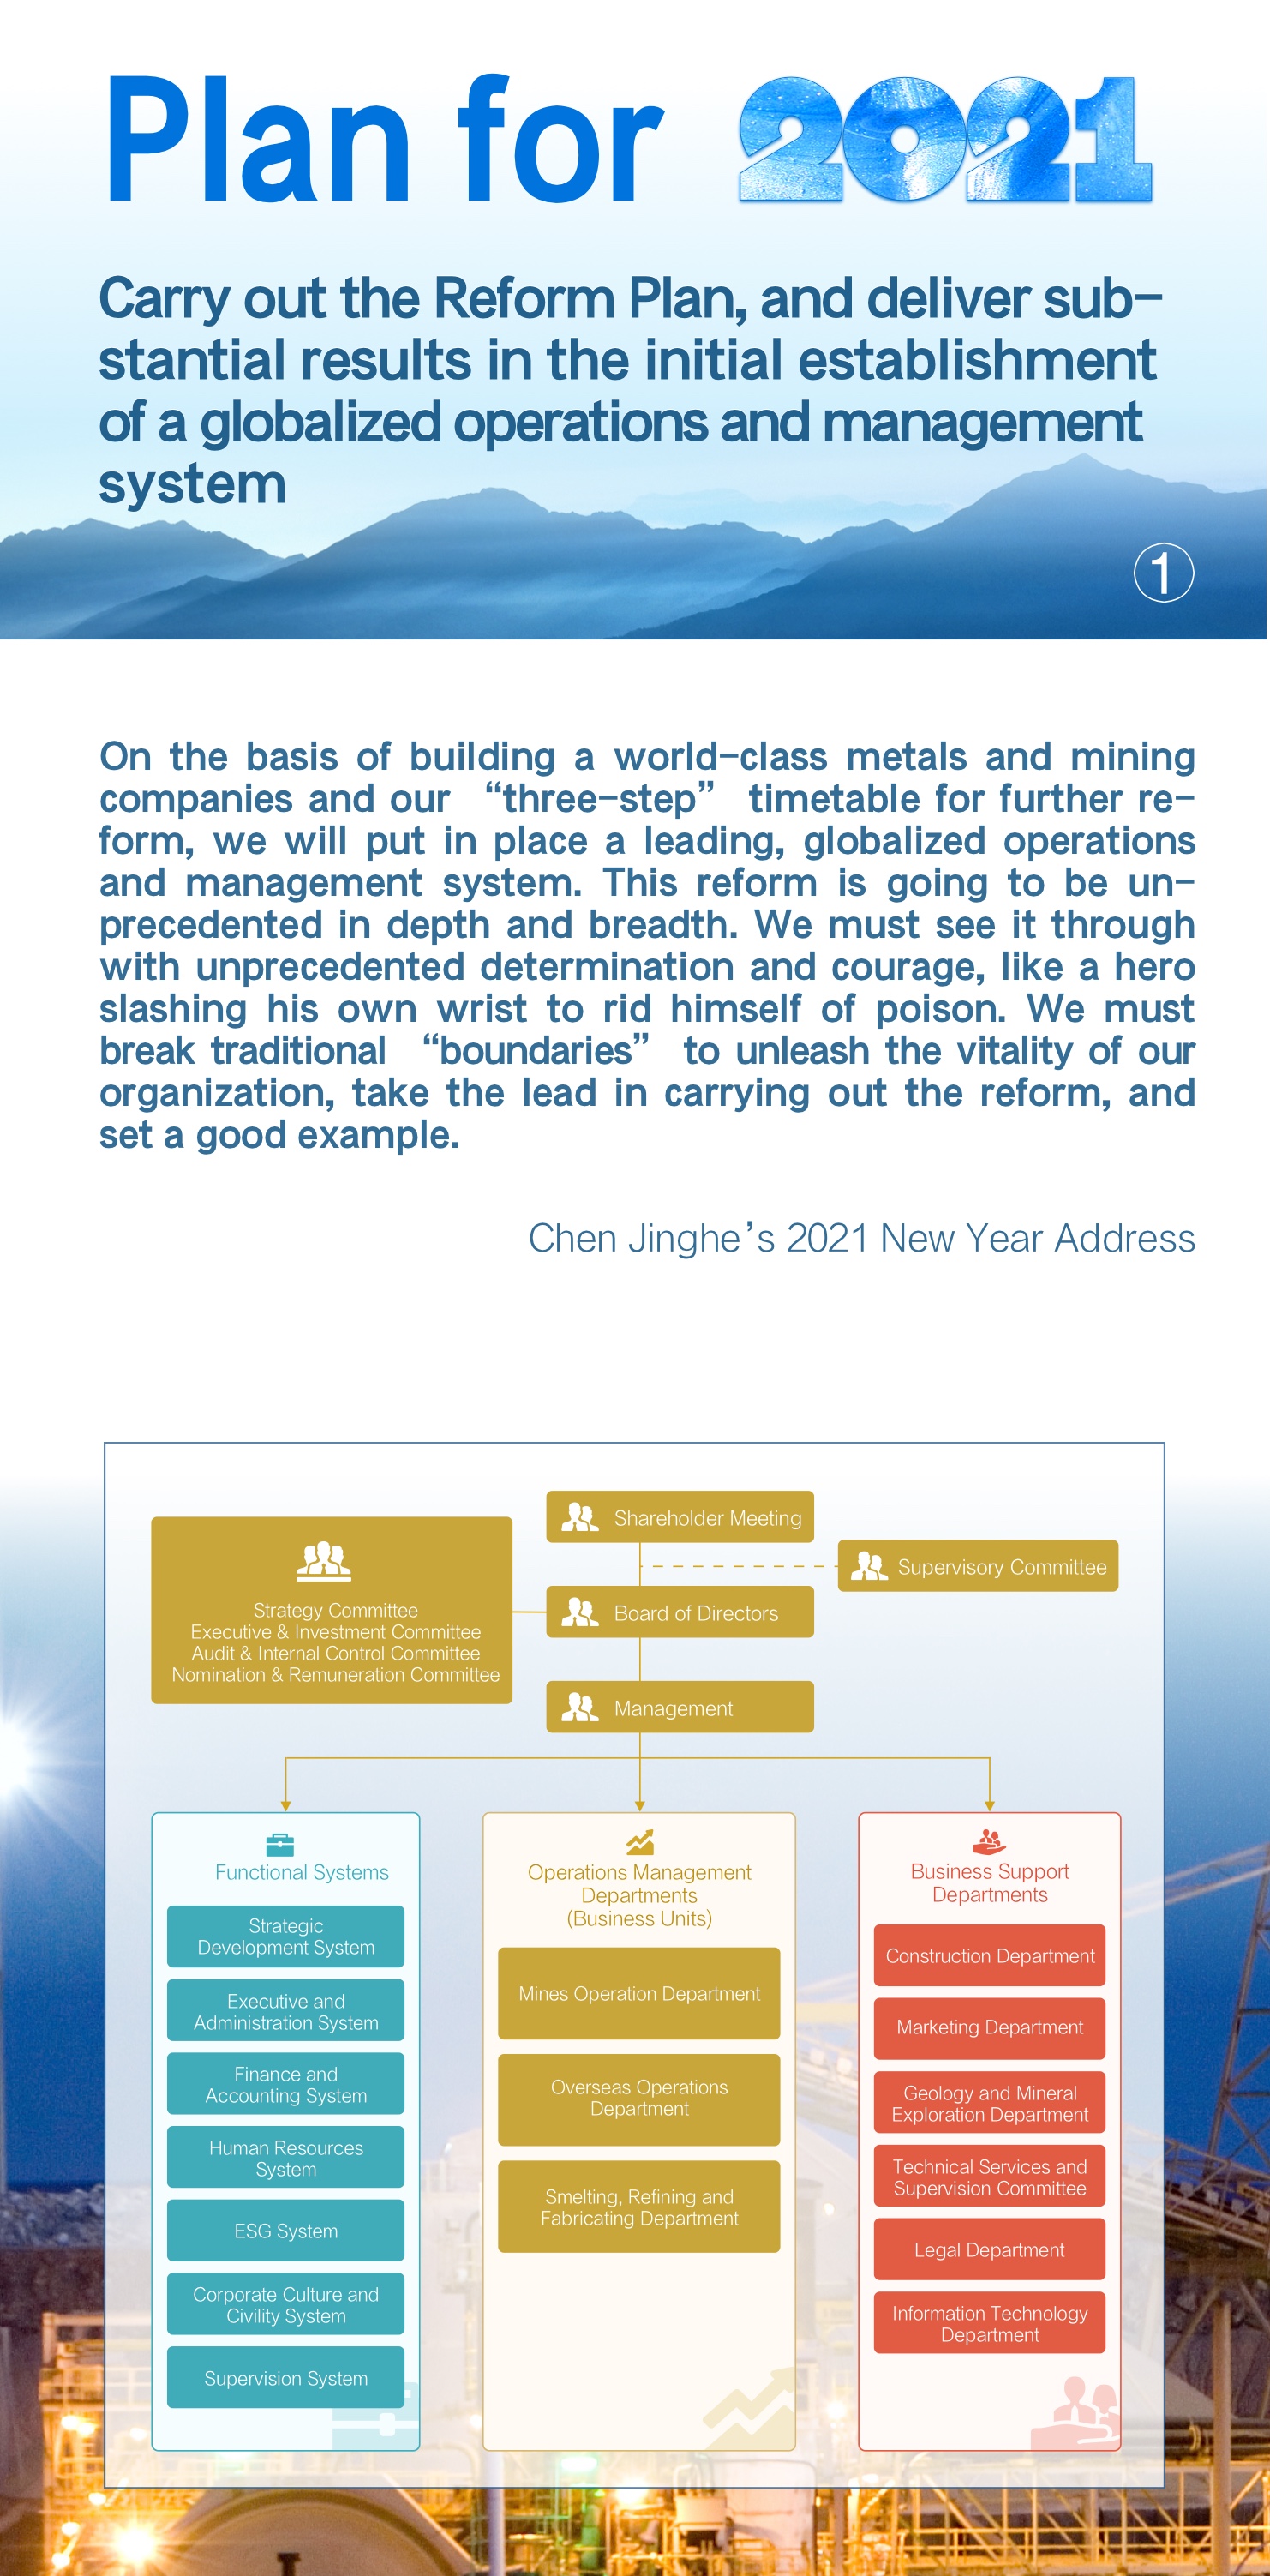 Plan for 2021: Carry out the Reform Plan, and deliver substantial results in the initial establishment of a globalized operations and management system